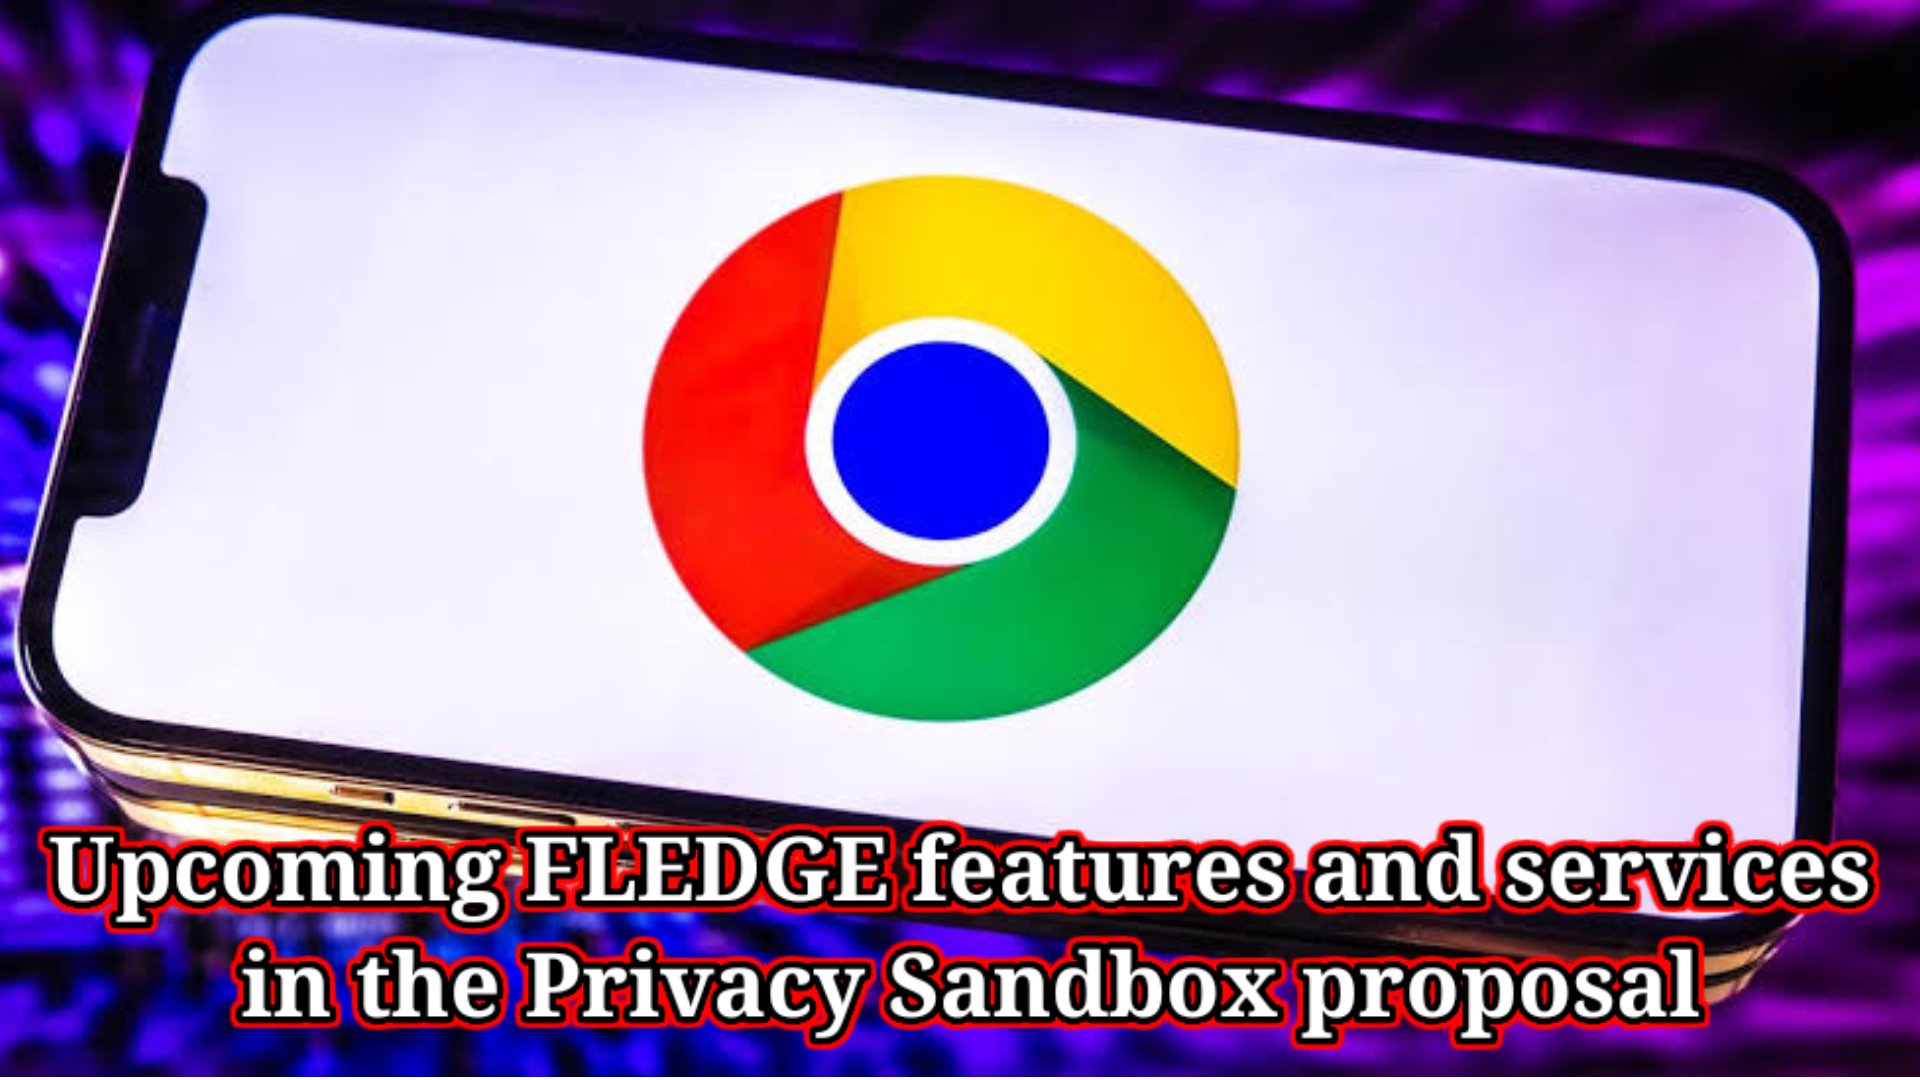 an update on upcoming FLEDGE features and services in the Privacy Sandbox proposal